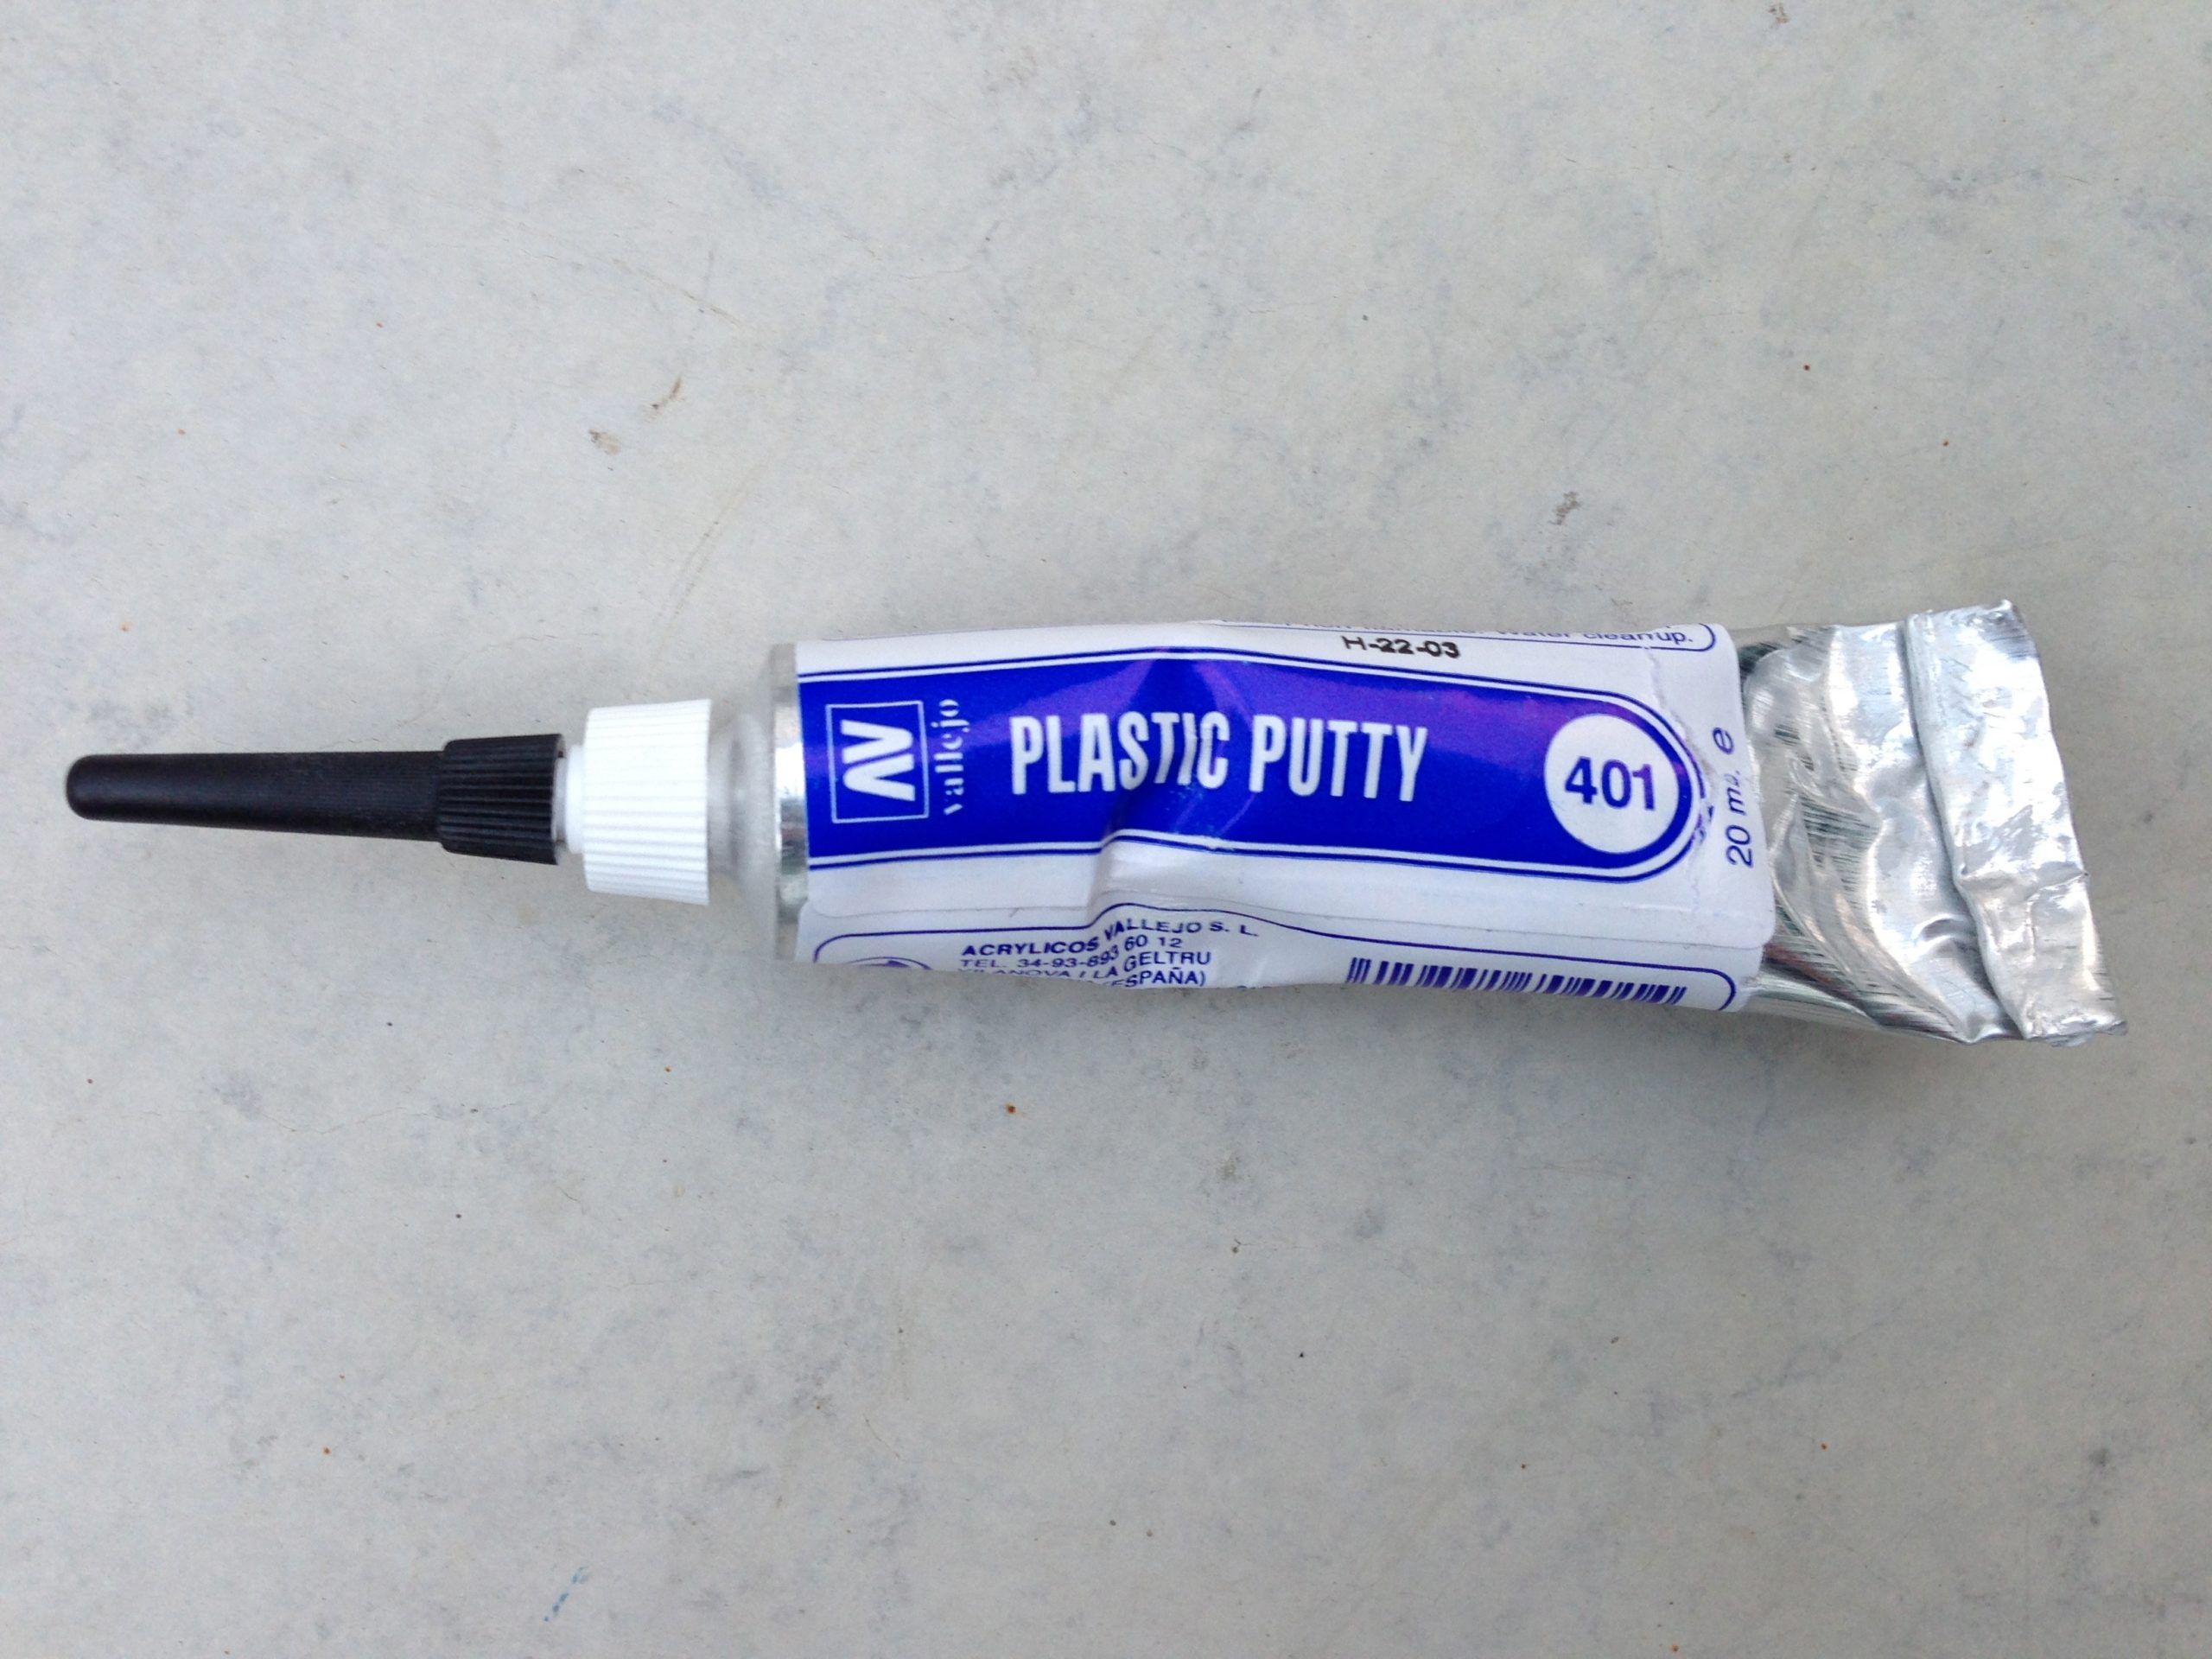 Vallejo Plastic Putty 401 review –